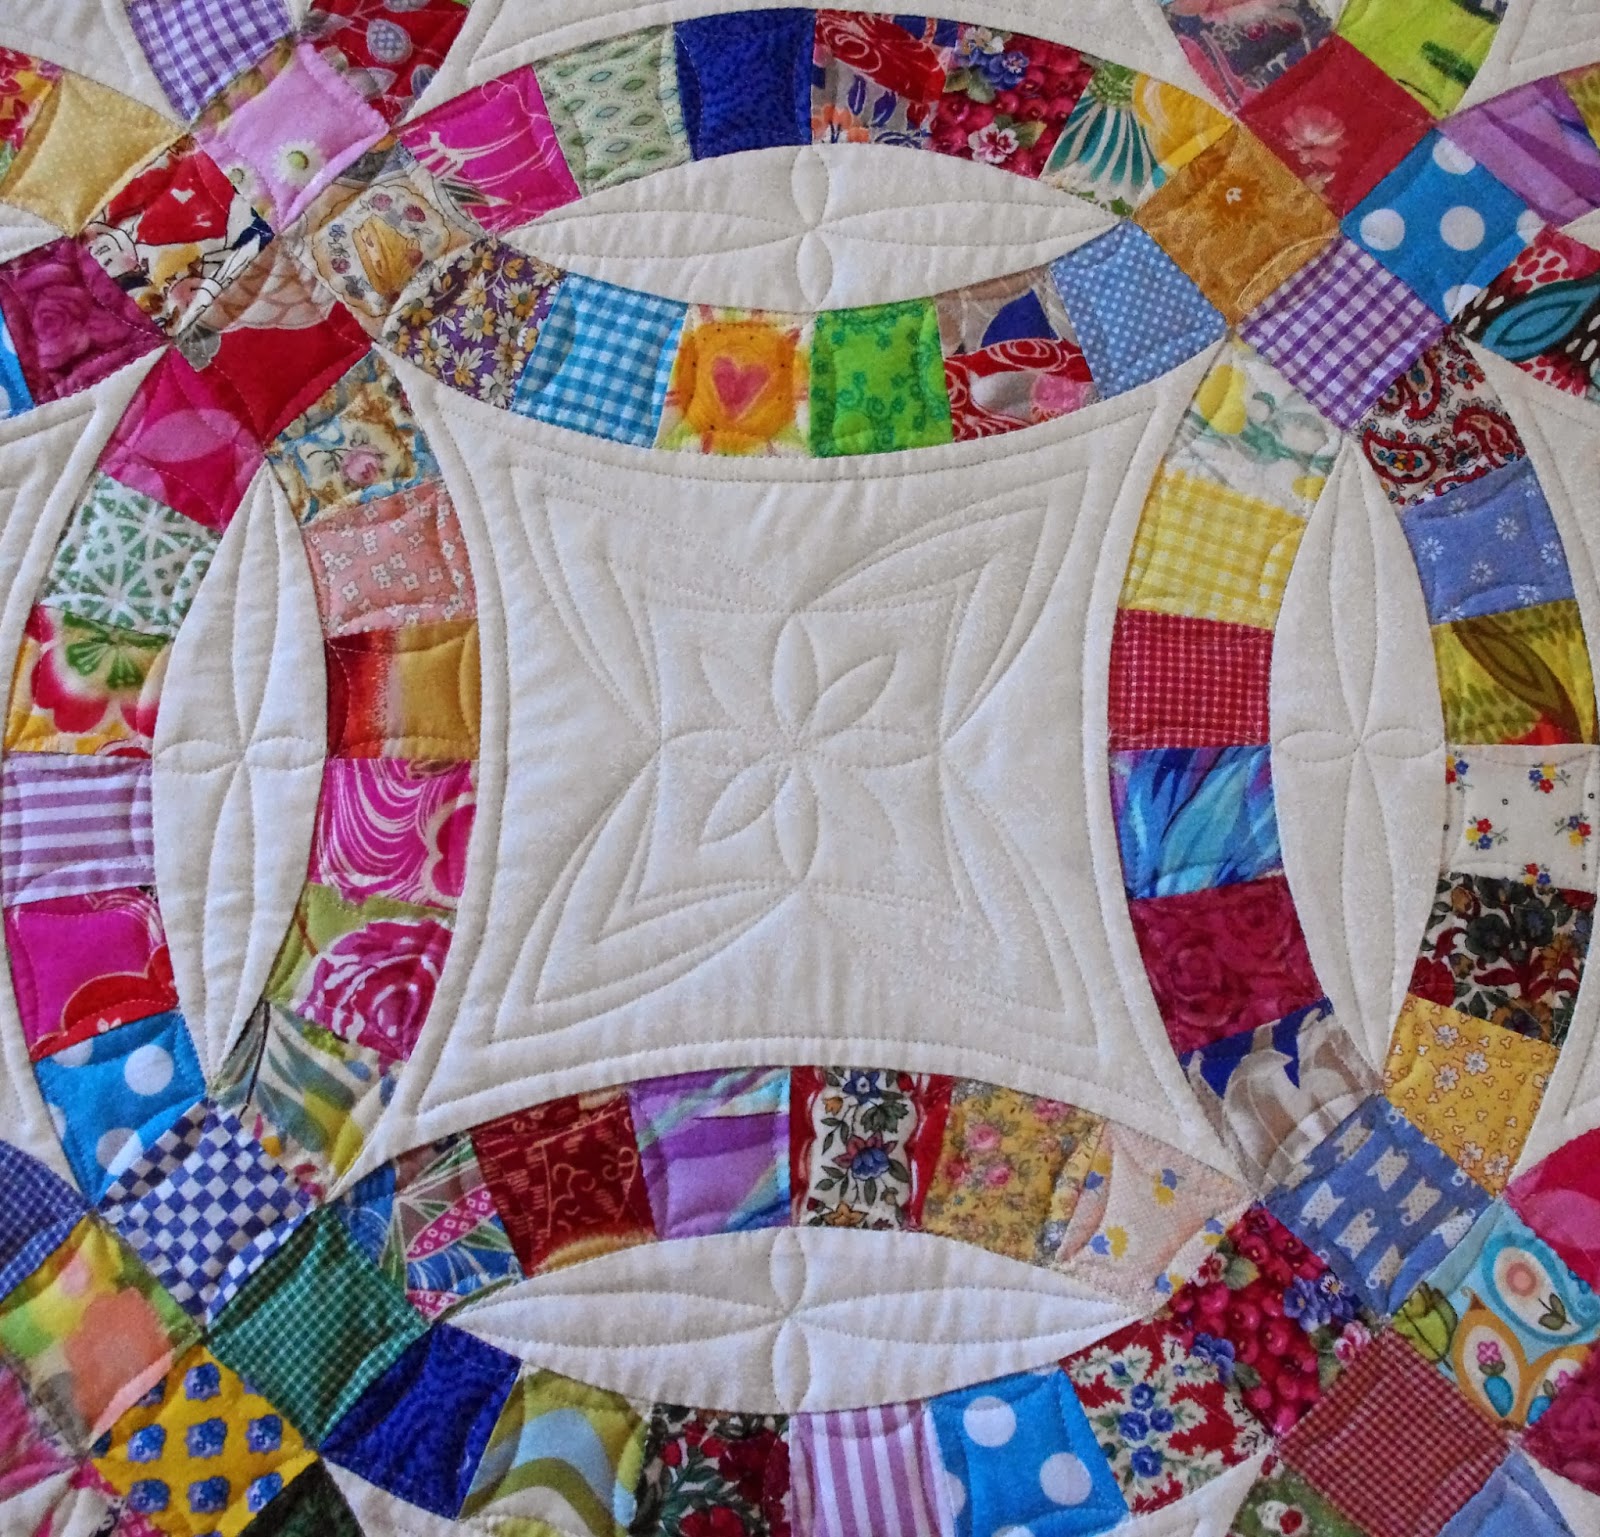 Wedding Ring Quilt Love This Wedding Ring Quilt That Was A Wedding Gift ...